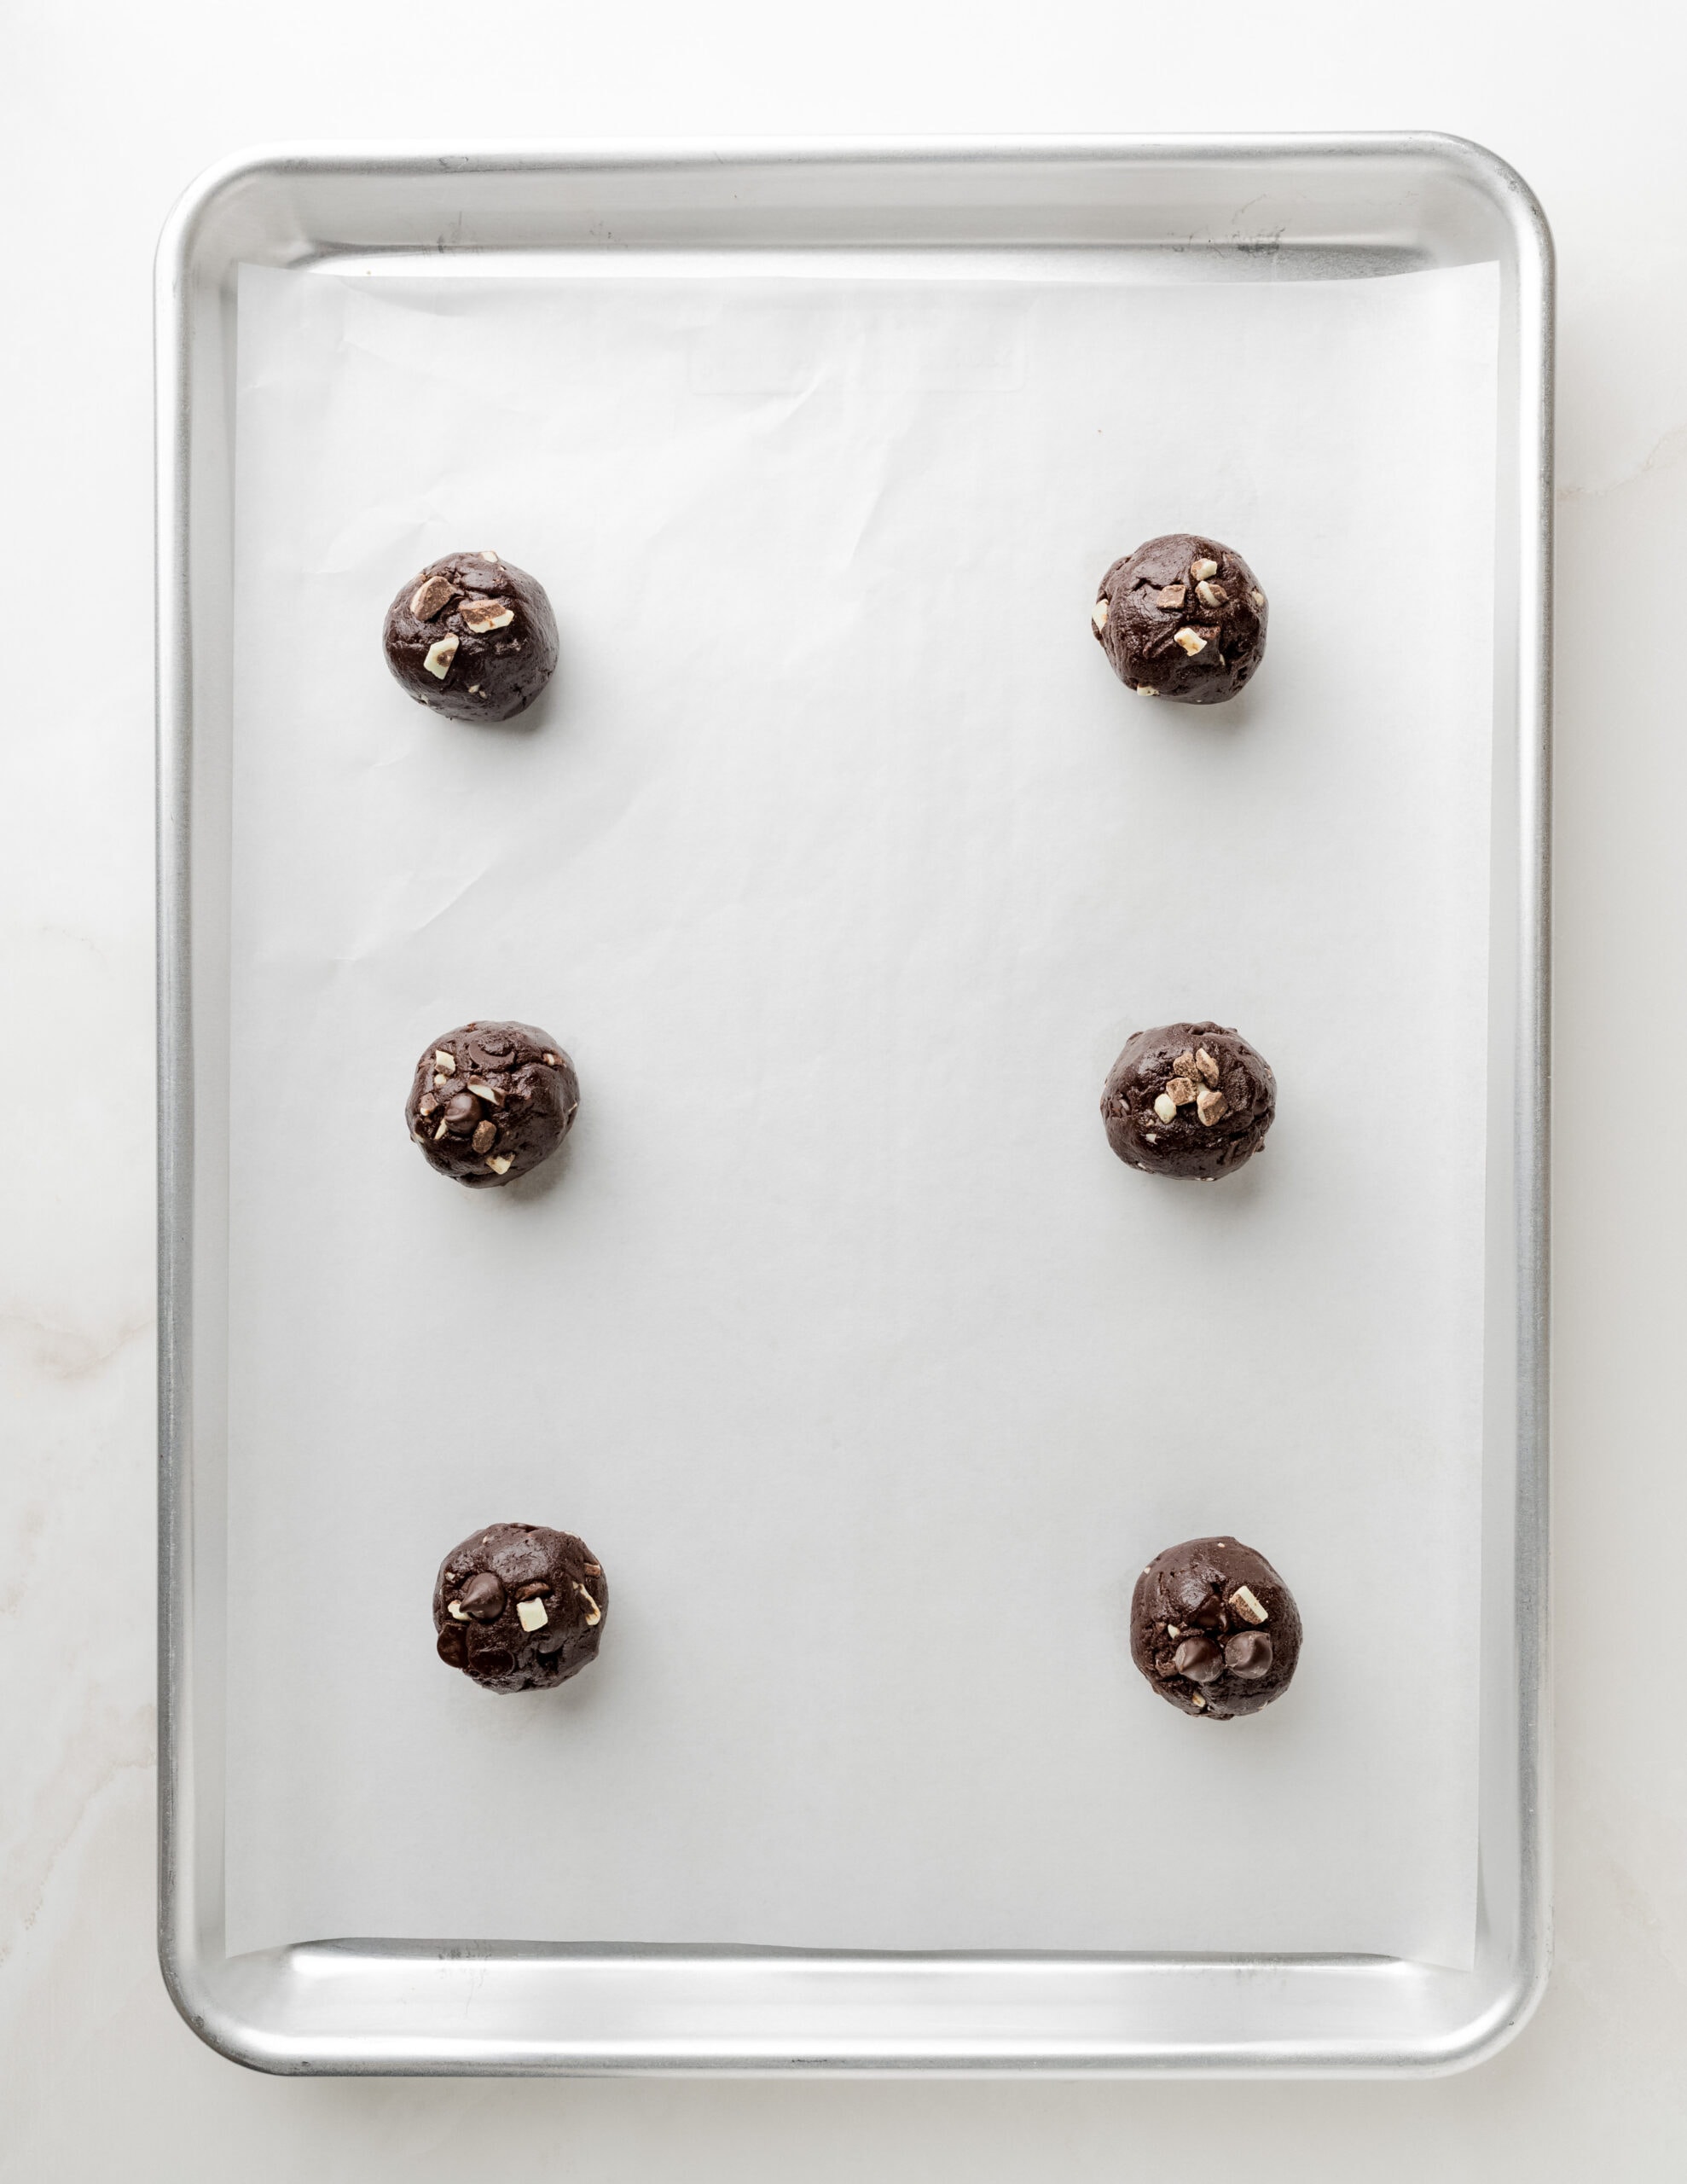 A large silver baking tray lined with parchment paper and six round balls of mint chocolate cookie dough.